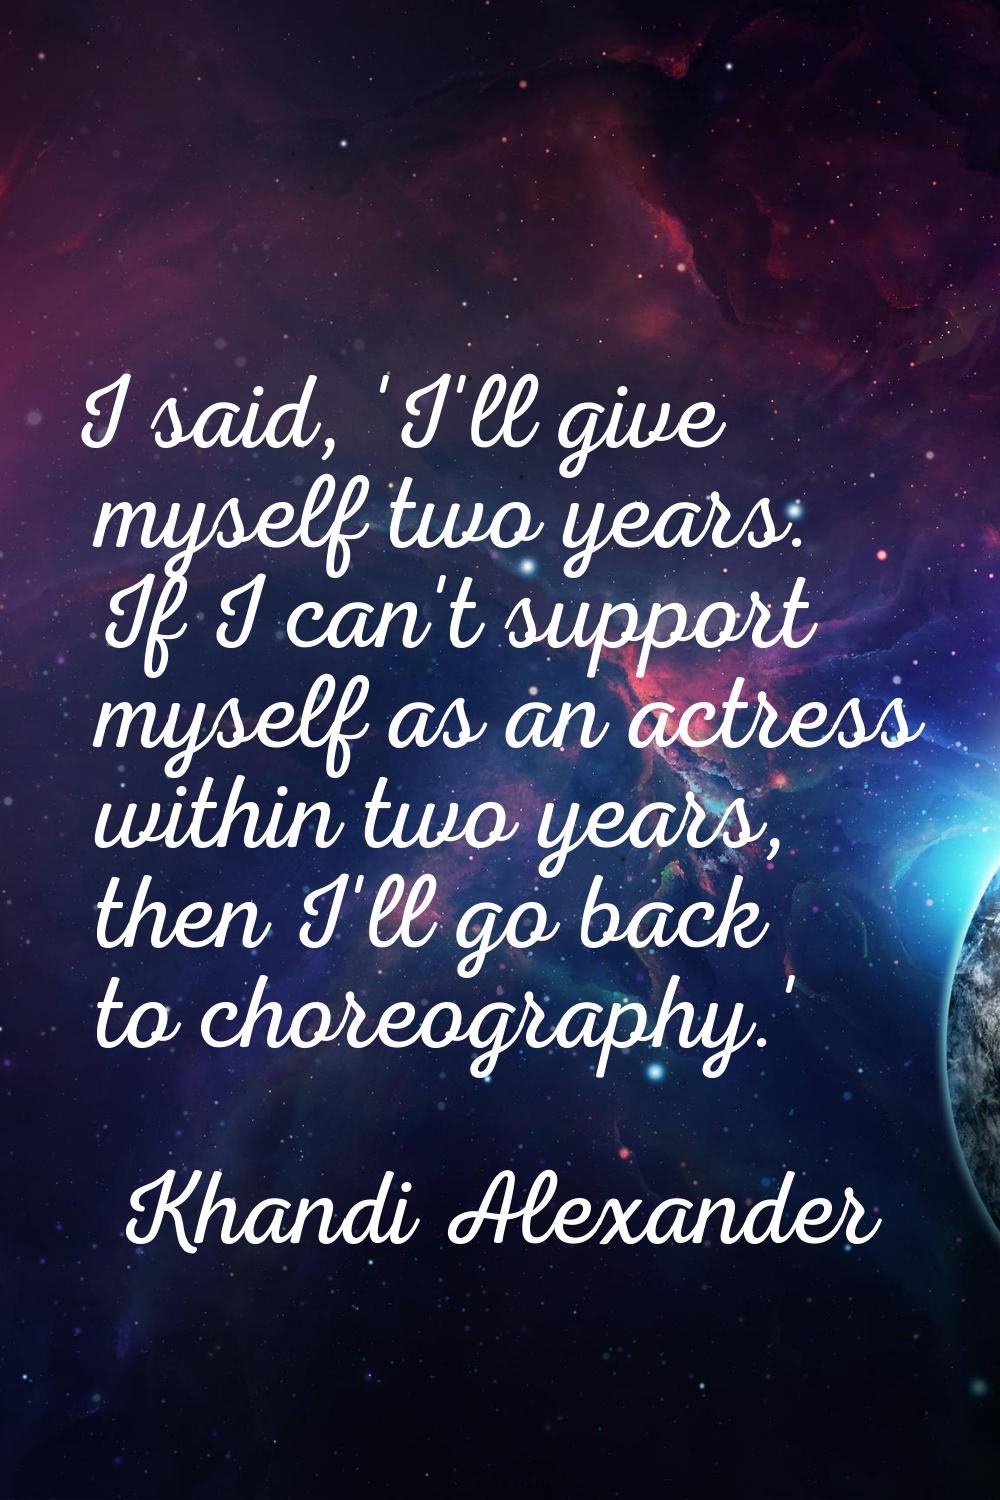 I said, 'I'll give myself two years. If I can't support myself as an actress within two years, then